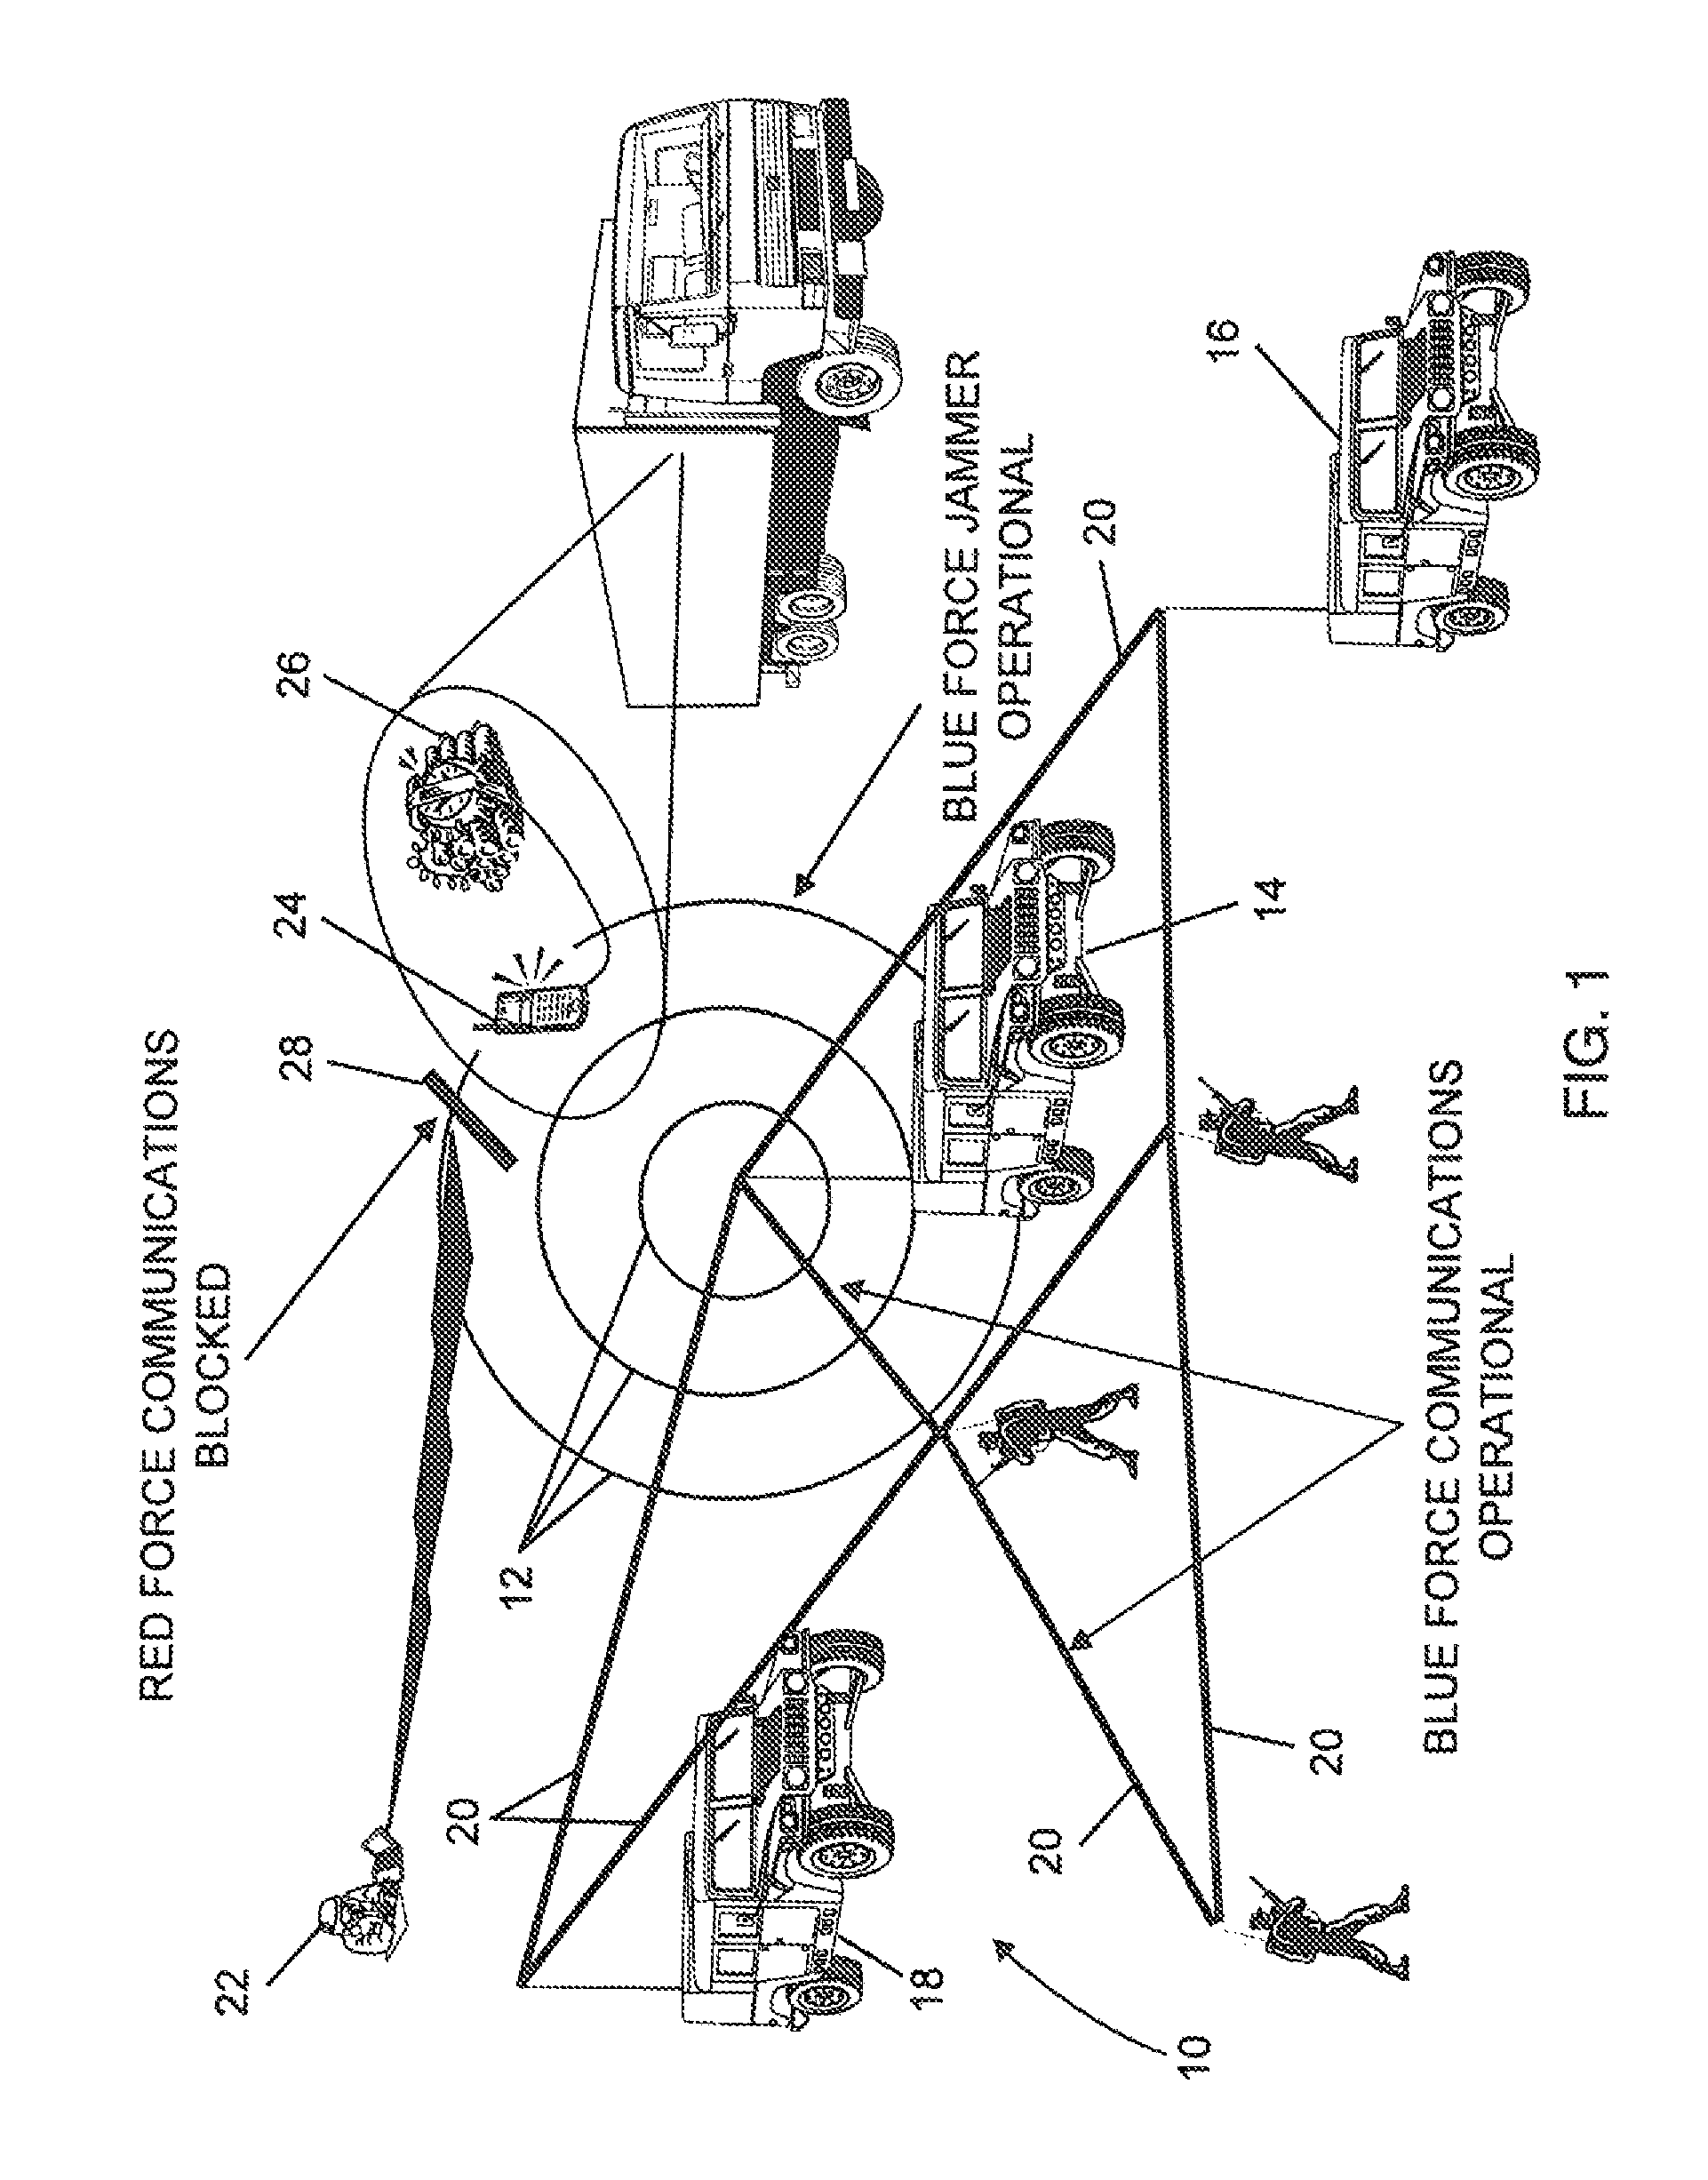 Tactical radio and radio network with electronic countermeasures